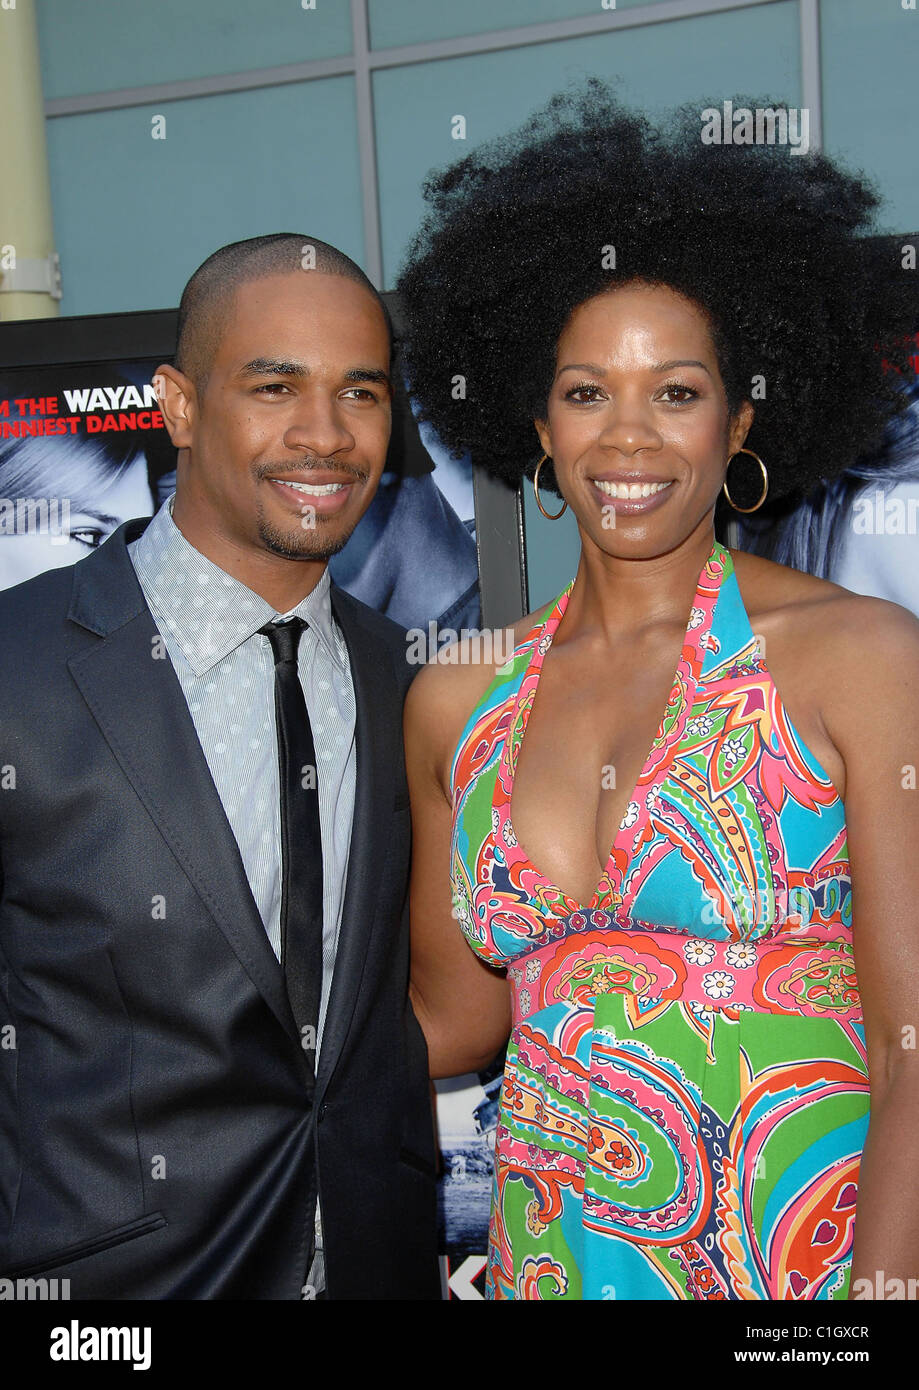 Damon Wayans Jr, Kim Wayans Los Angeles Premiere of 'Dance Flick'  held at the Arclight Theatre - Arrivals Hollywood, Stock Photo